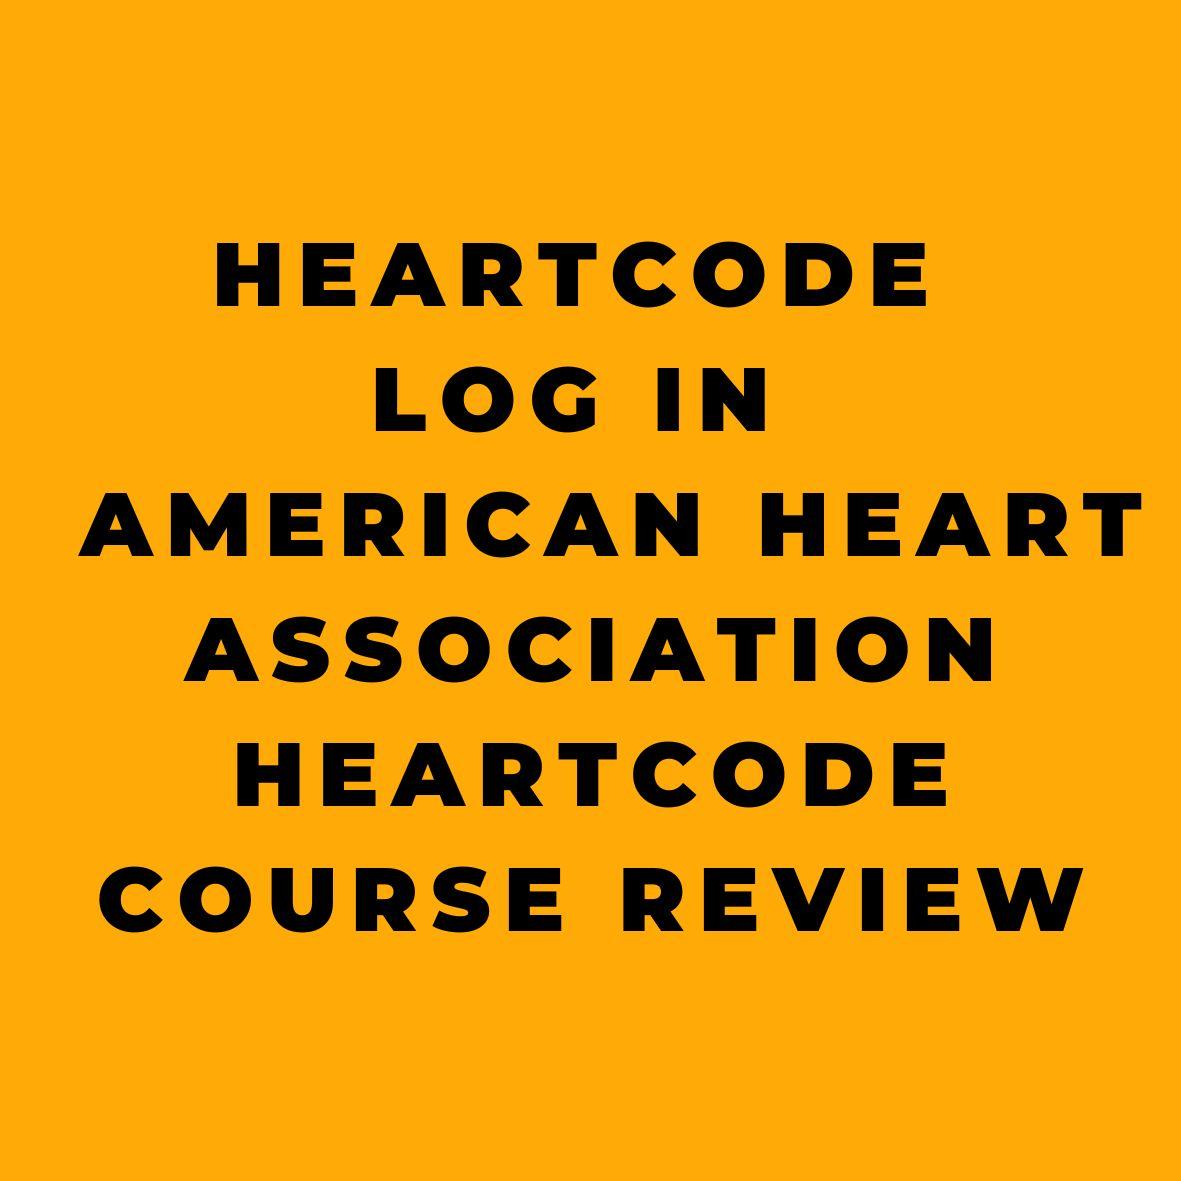 Heartcode Log In American Heart Association Heartcode Course Review